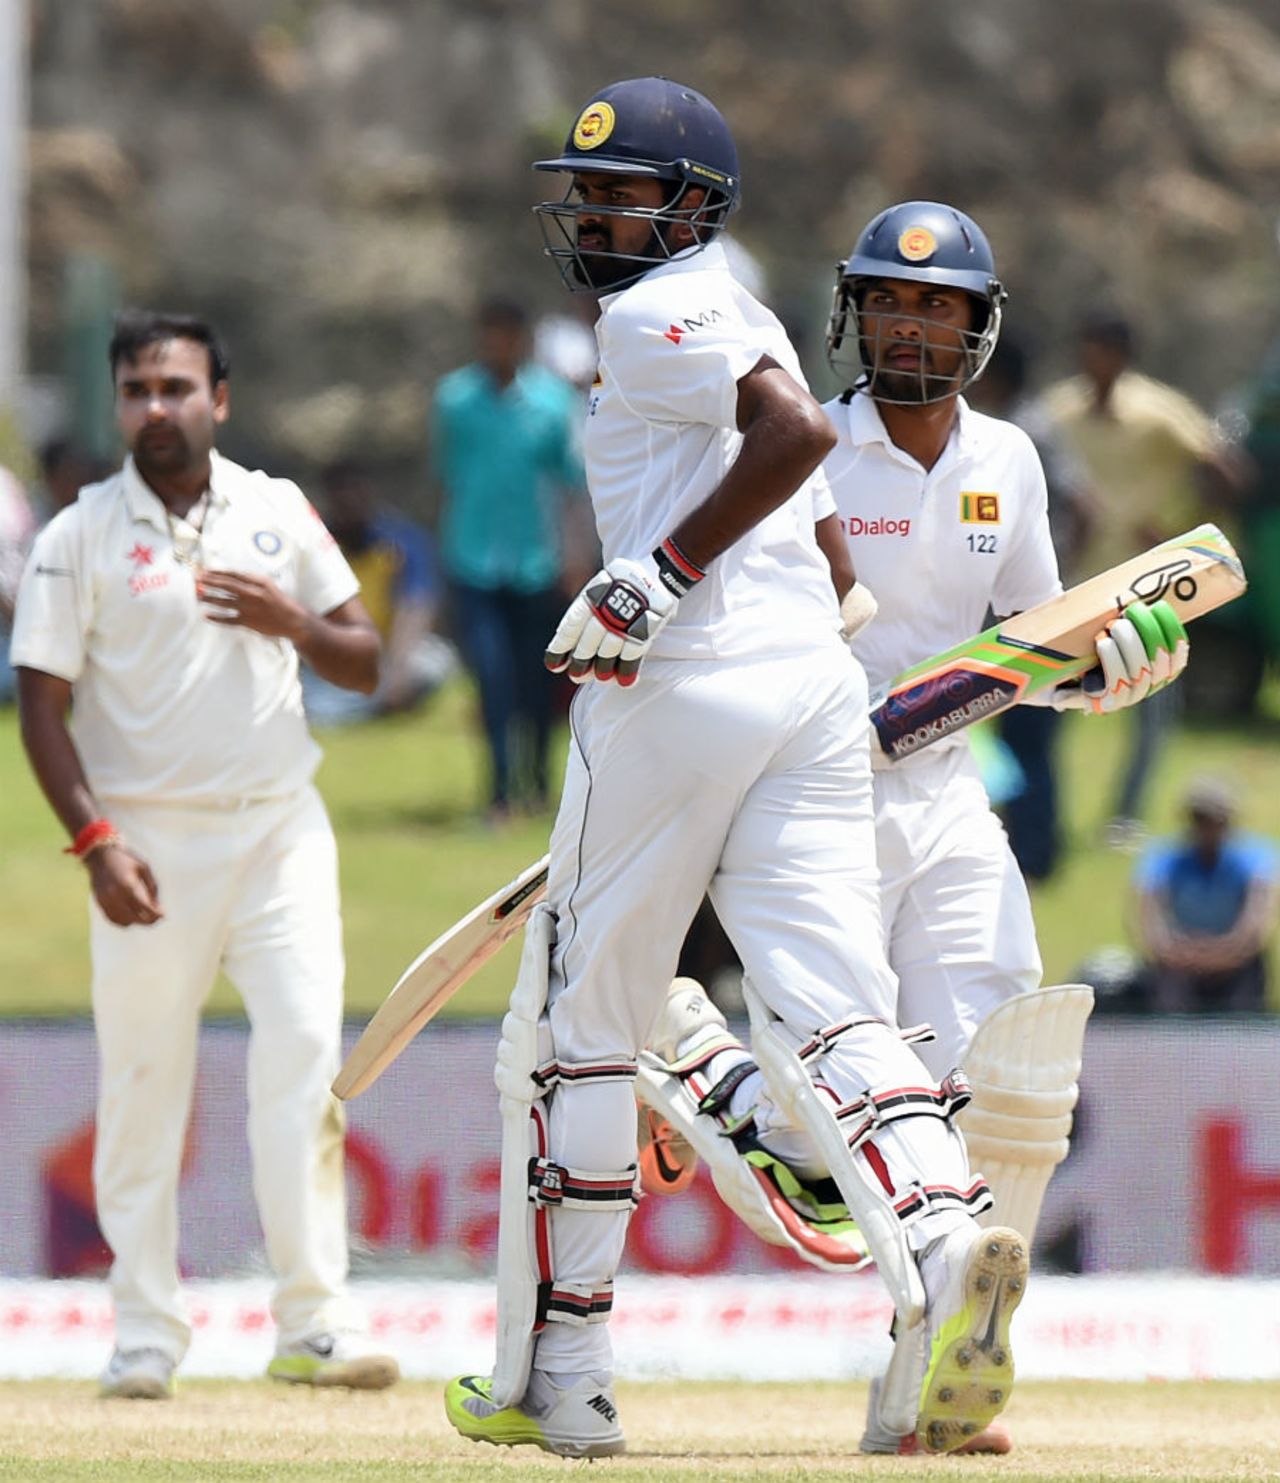 Lahiru Thirimanne and Dinesh Chandimal added 125 for the sixth wicket, Sri Lanka v India, 1st Test, Galle, 3rd day, August 14, 2015